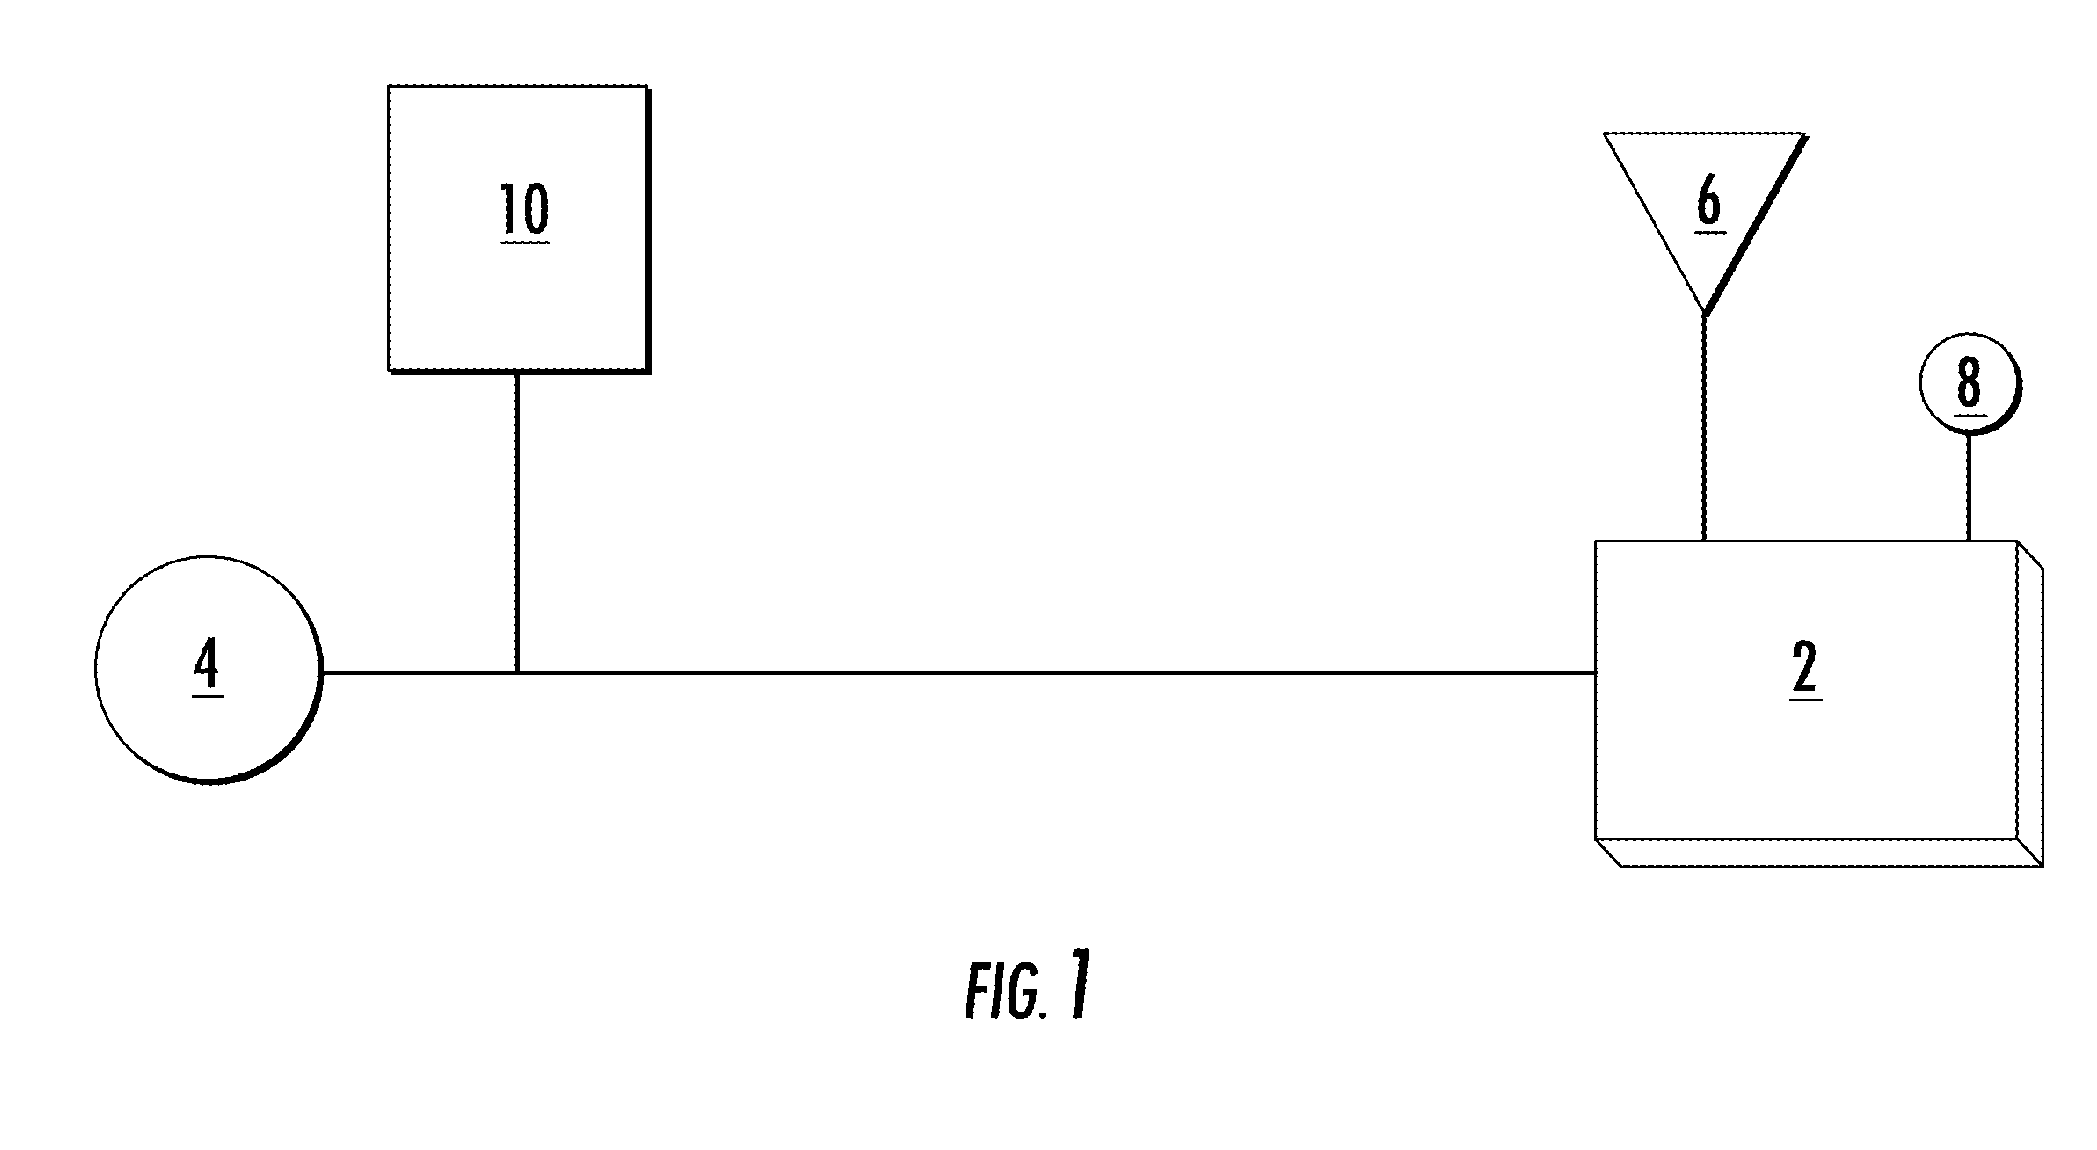 Light-emitting nanoparticles and method of making same